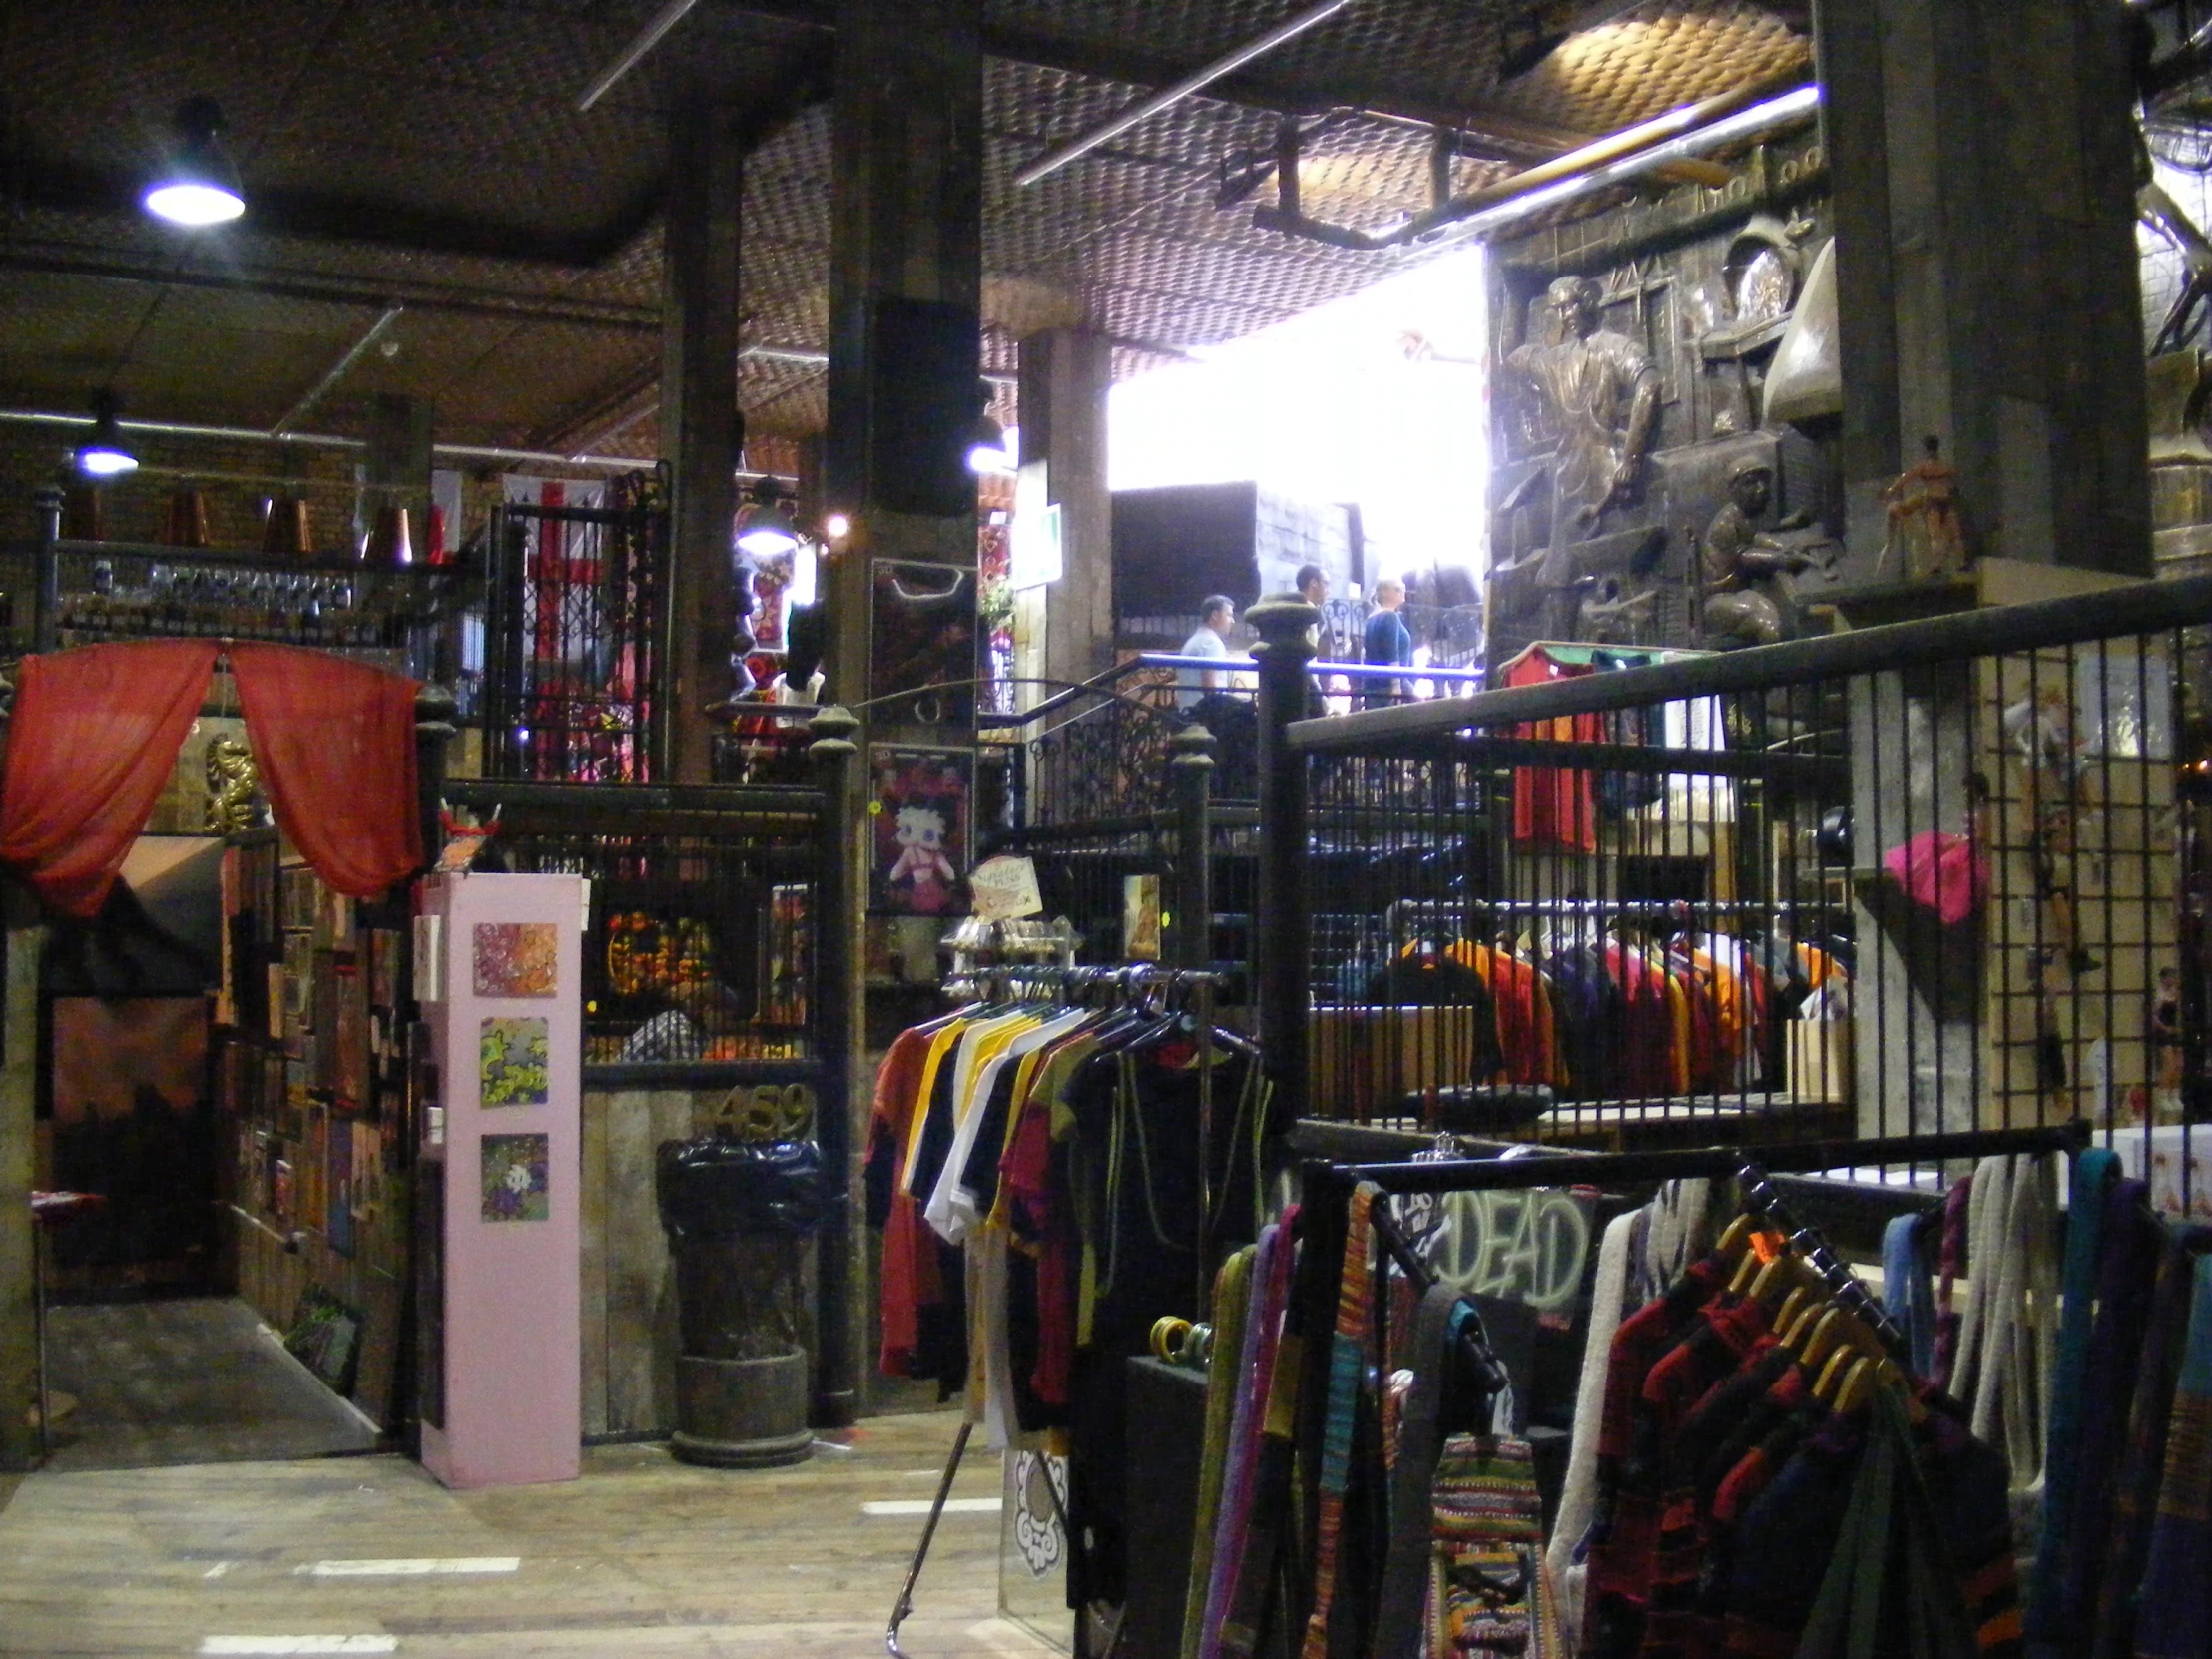 inside the store with several shirts on racks